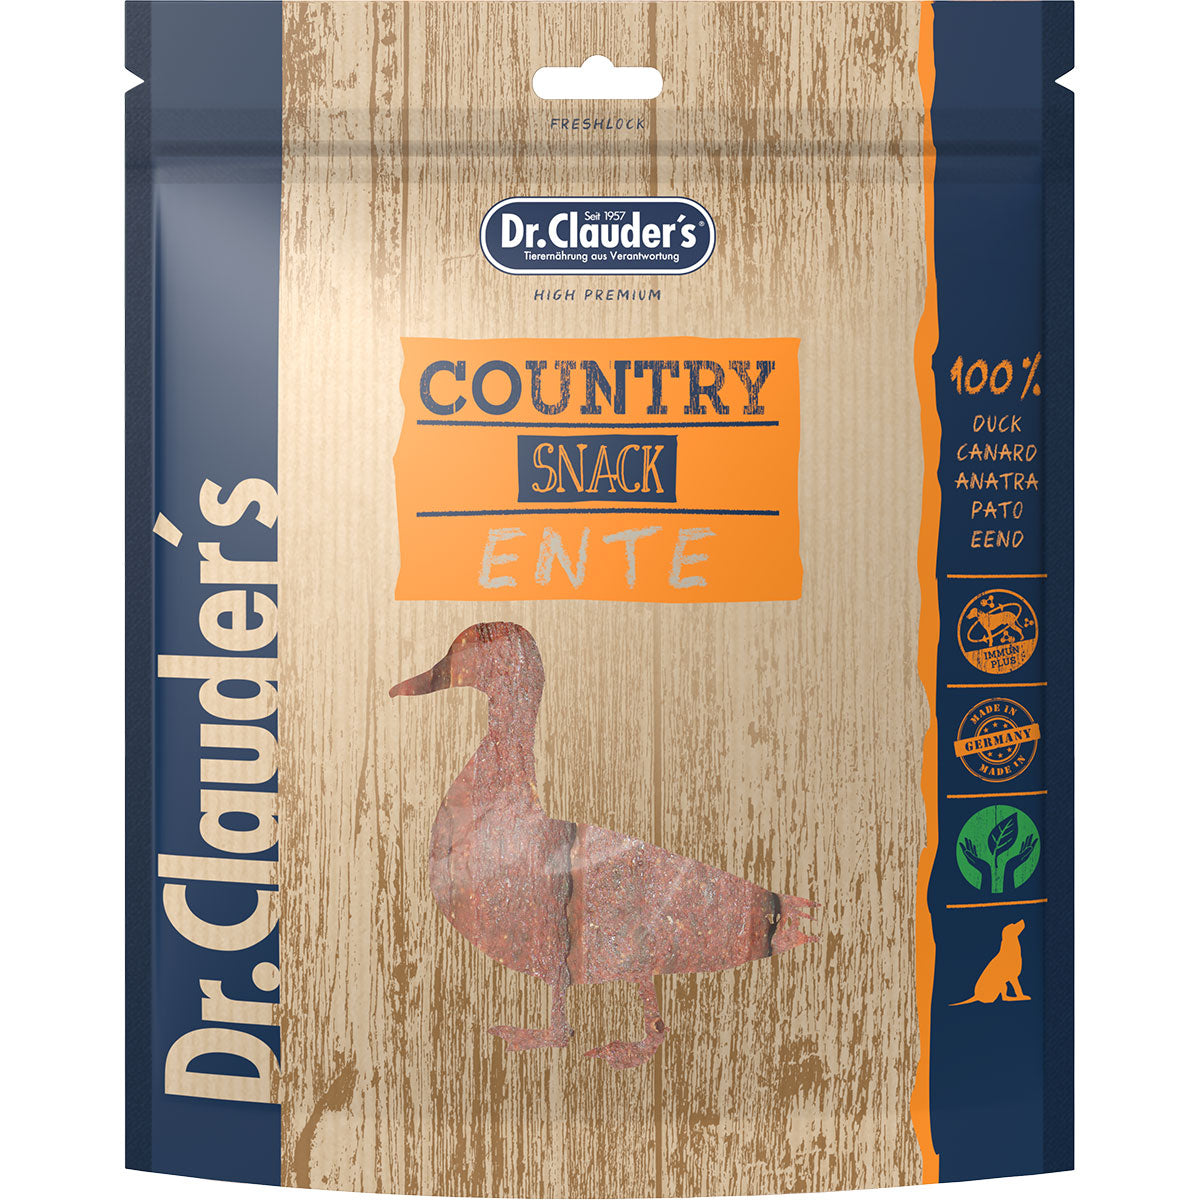 Dr. Clauders Snack Country Ente, 170g